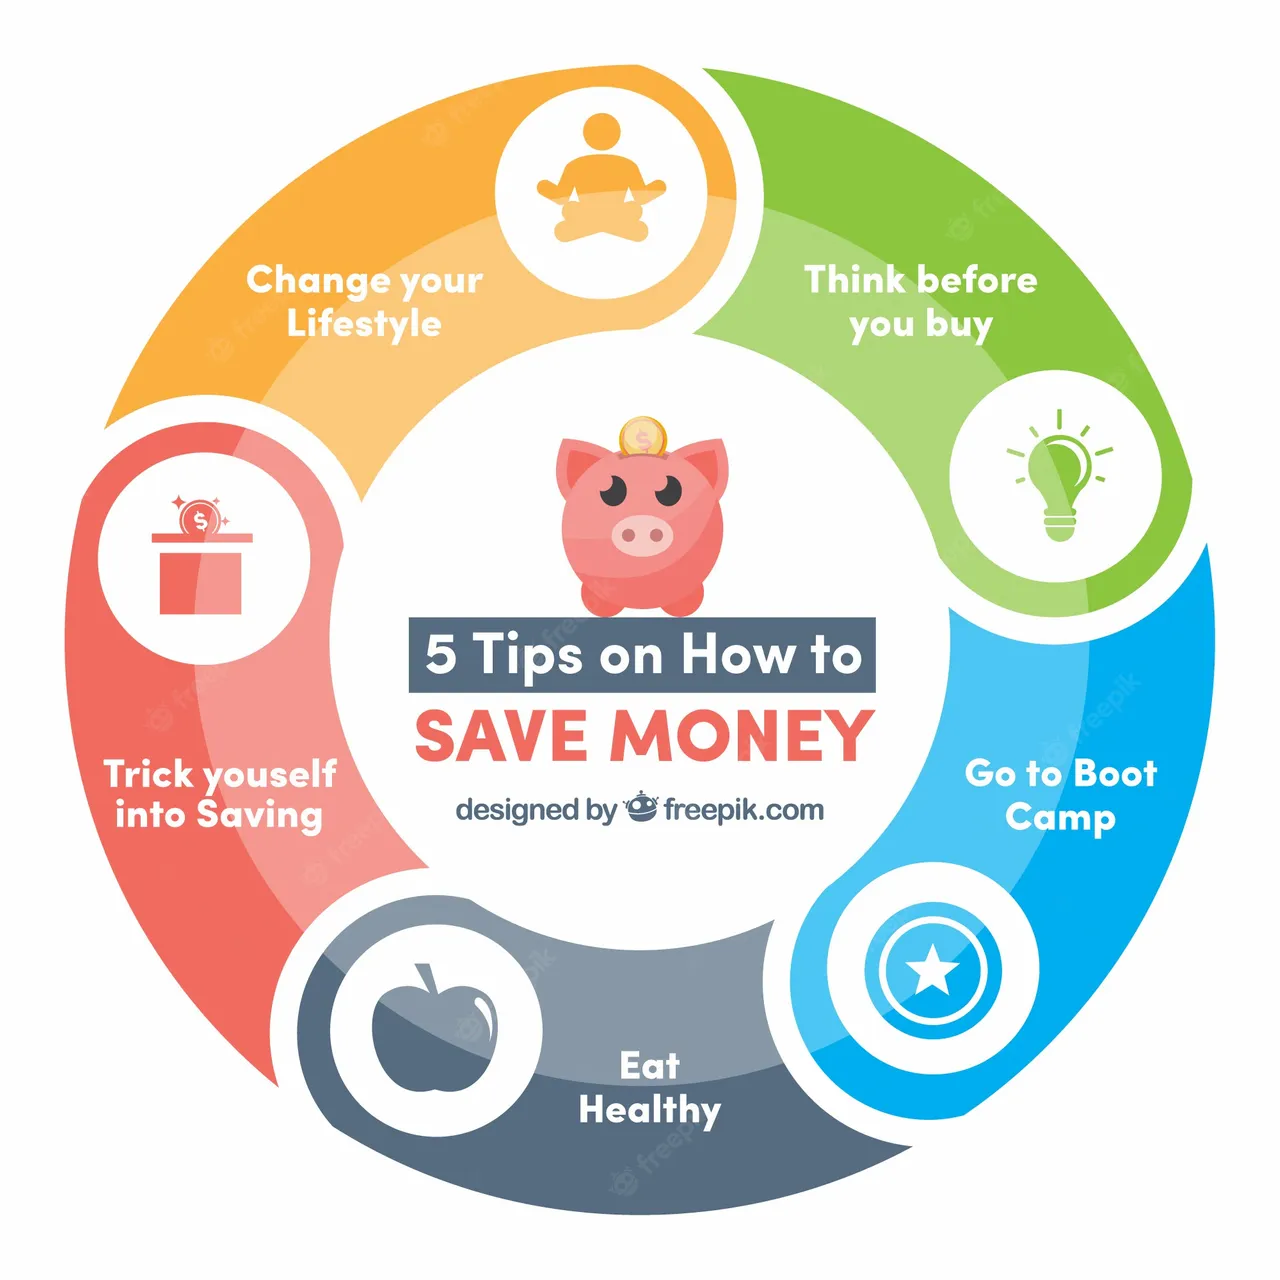 circular-graphic-with-tips-save-money_23-2147628922.jpg